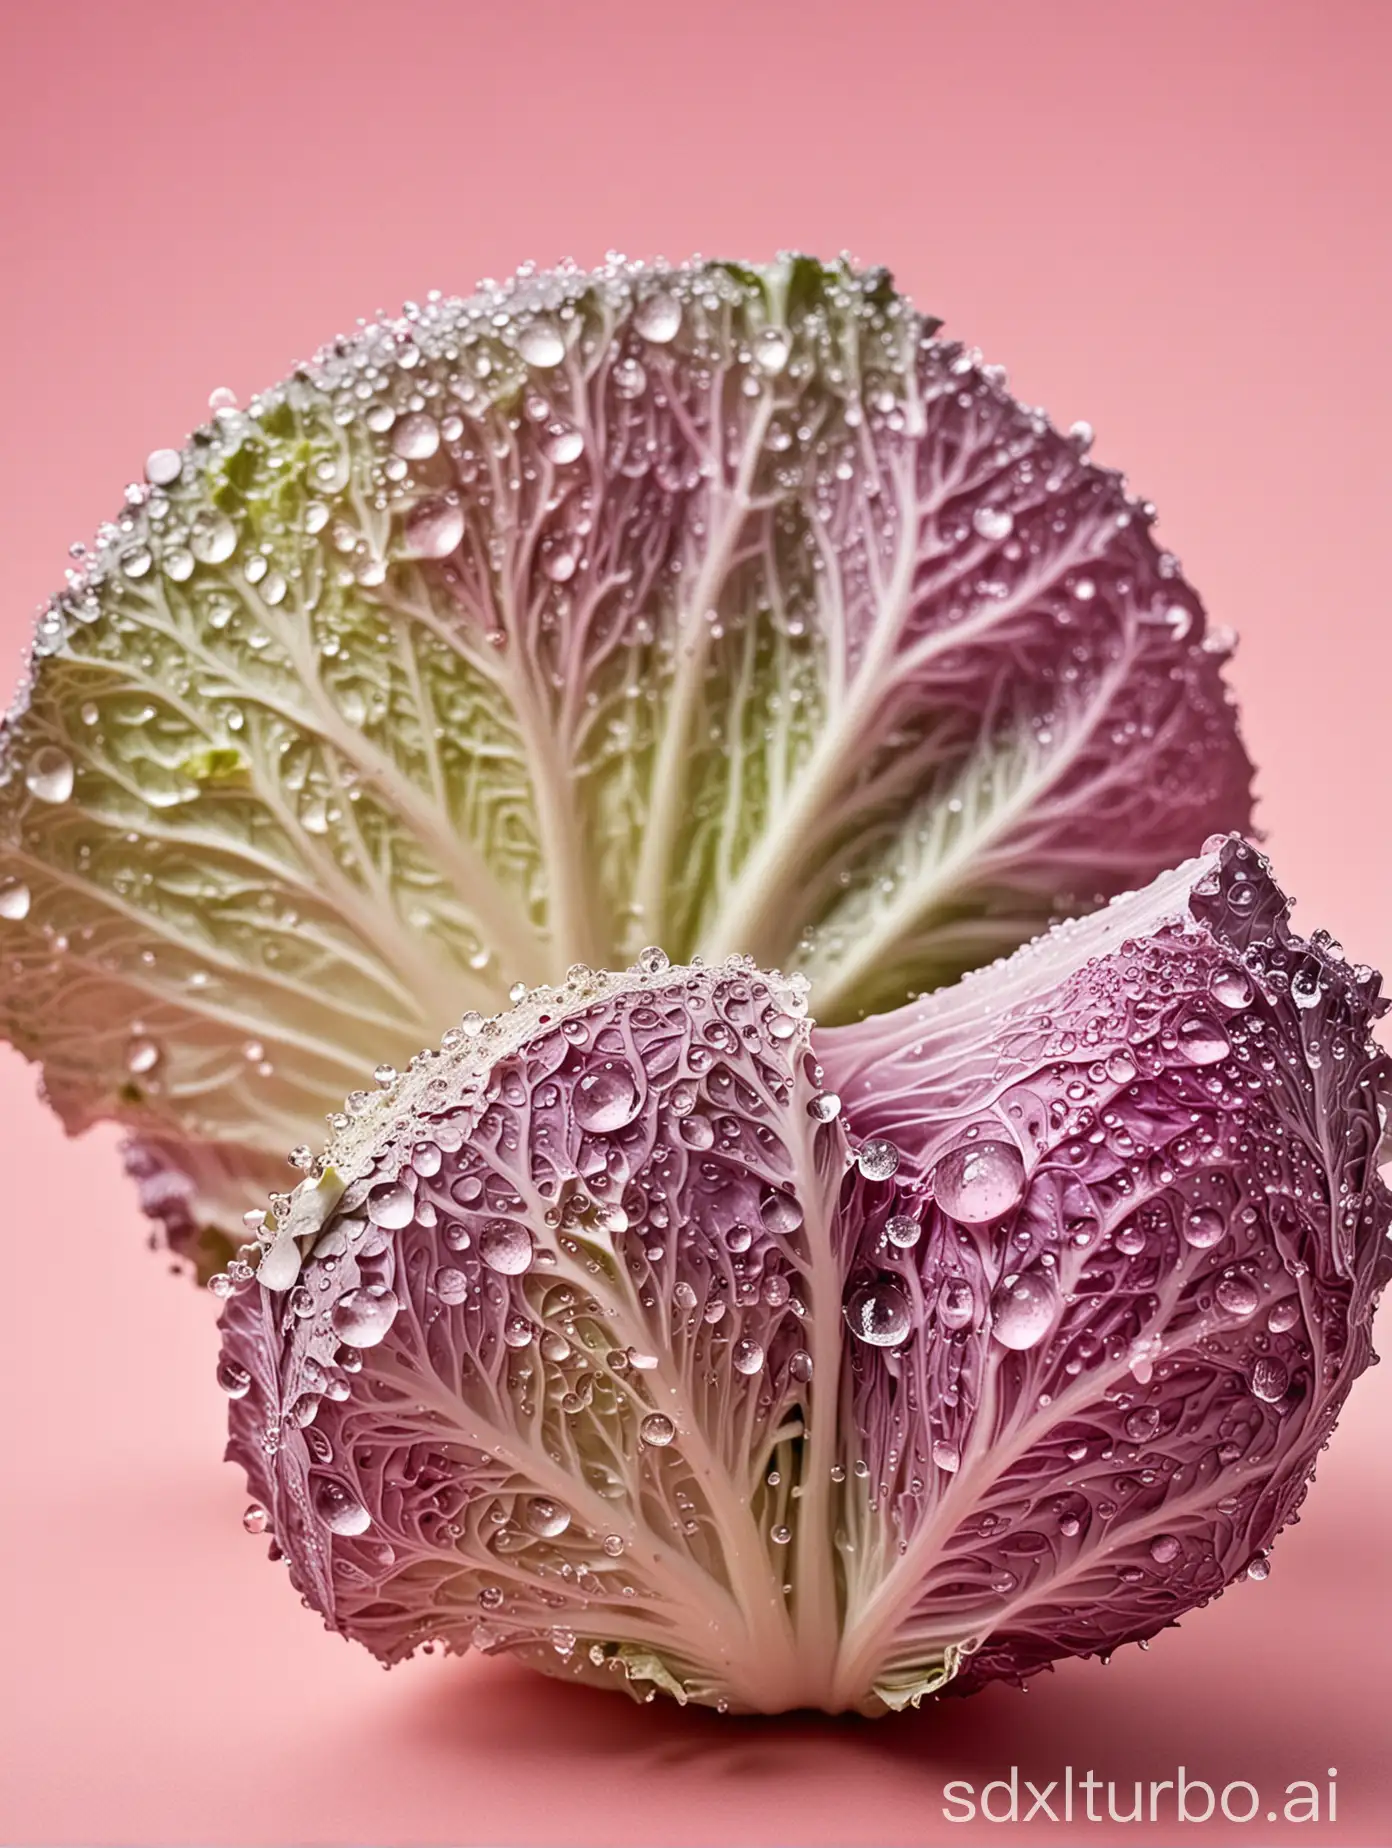 Vibrant-Cabbage-with-Water-Droplets-on-Light-Pink-Background